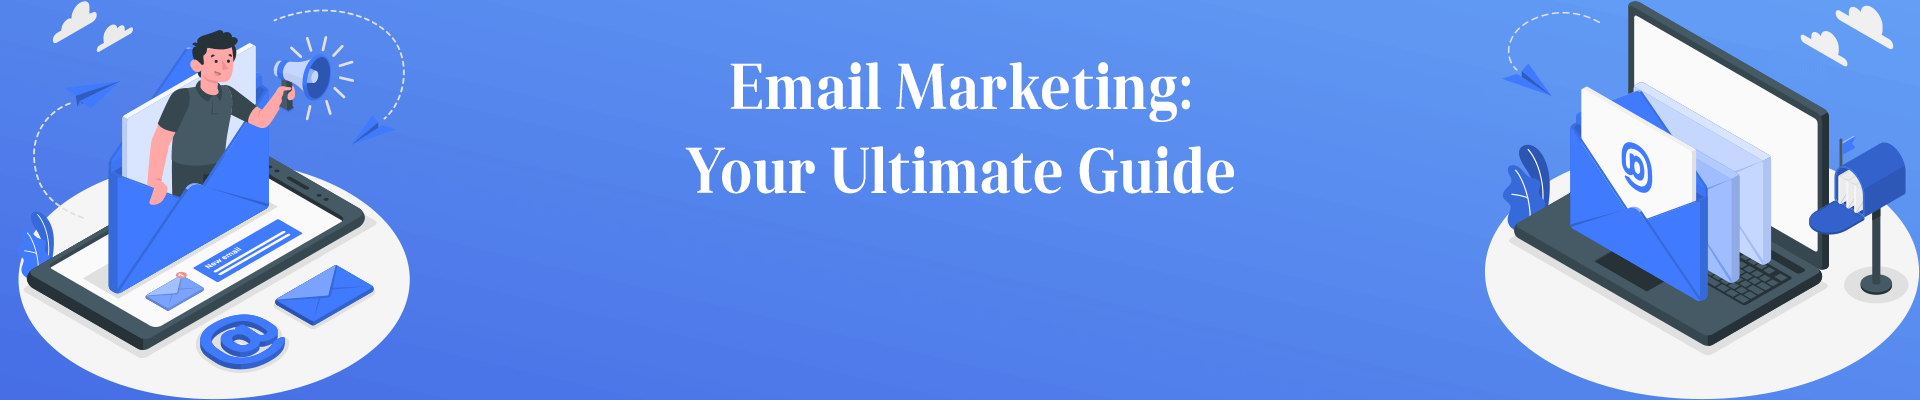 Email Marketing Banner.png